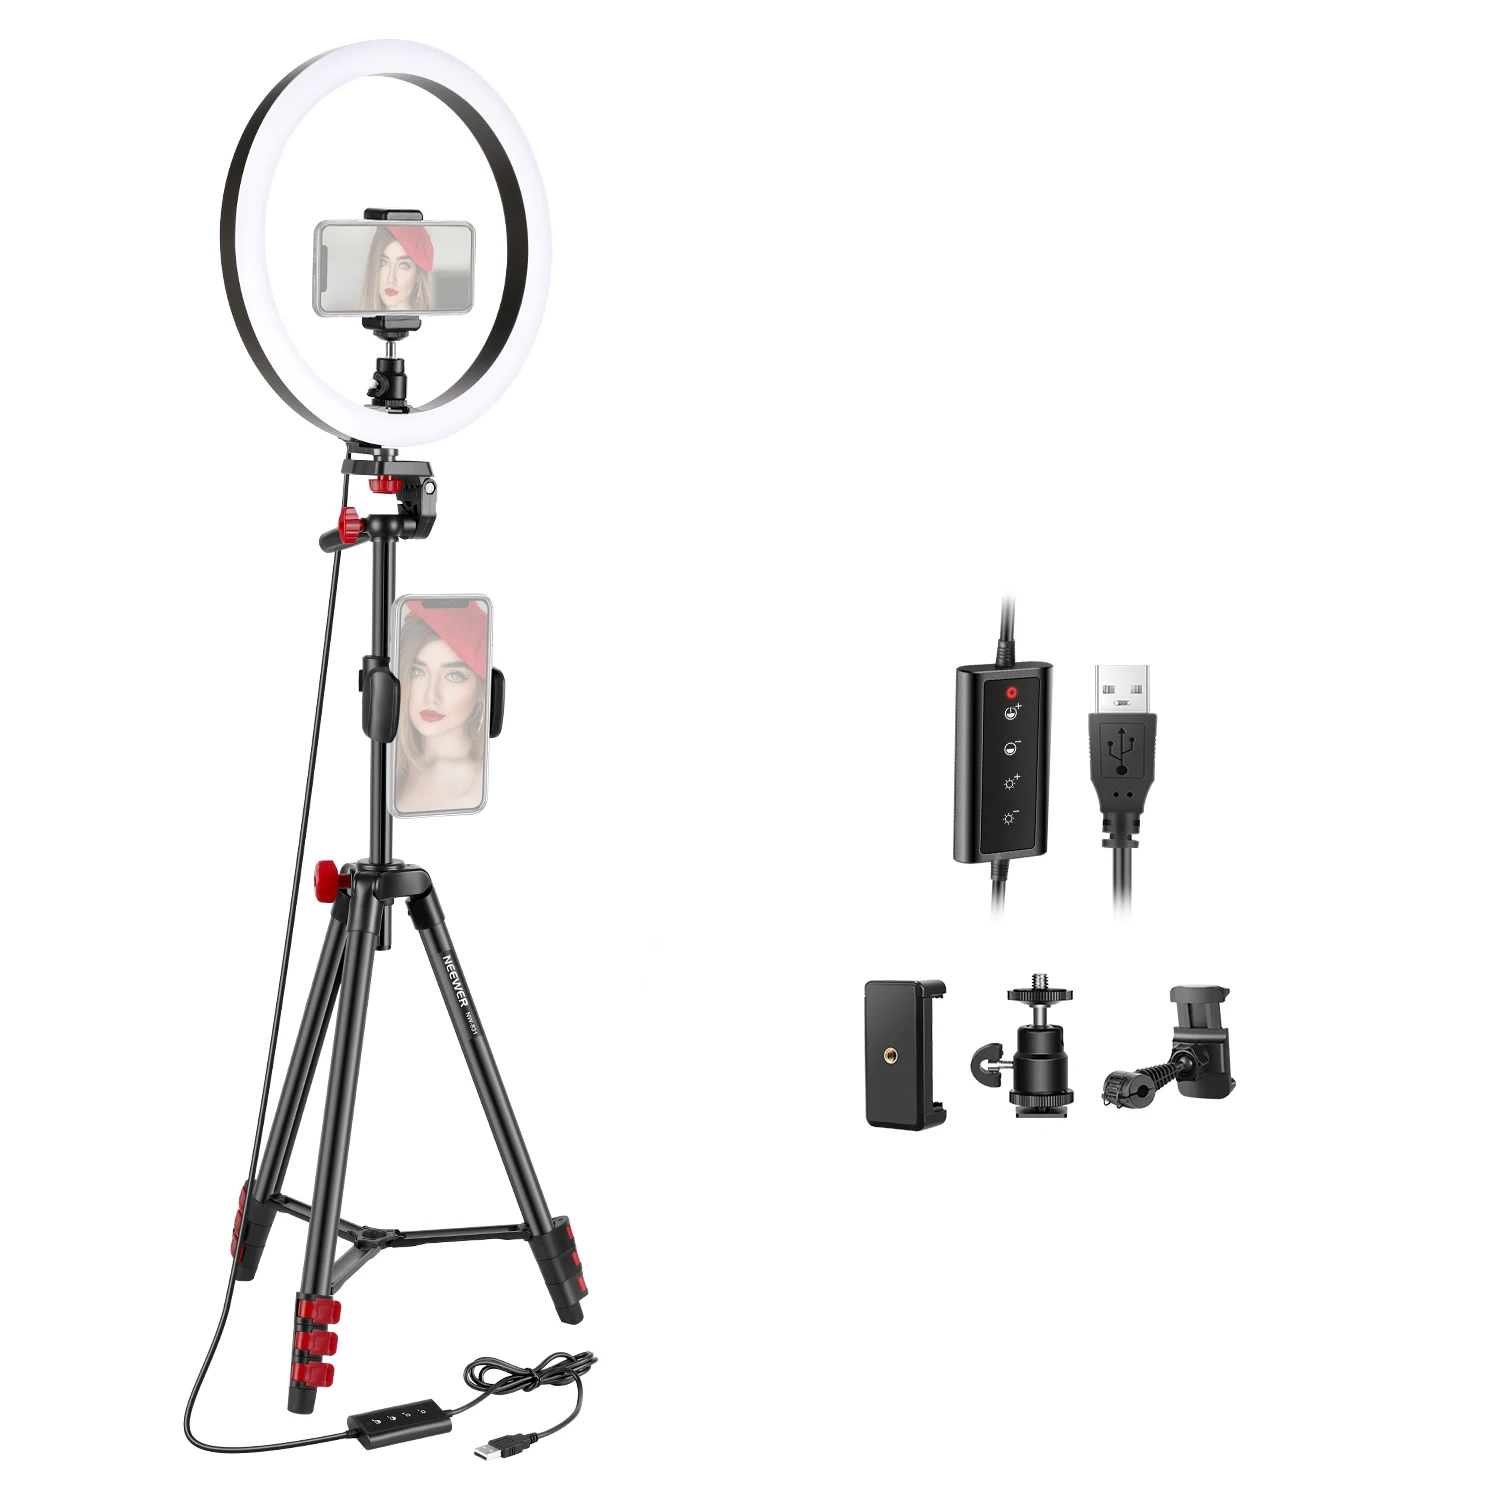 

Neewer Selfie LED Ringlight Kit: 10-inch Ring Light with 54" Stable Tripod and Smartphone Holder for YouTube Video/Vlog/Makeup